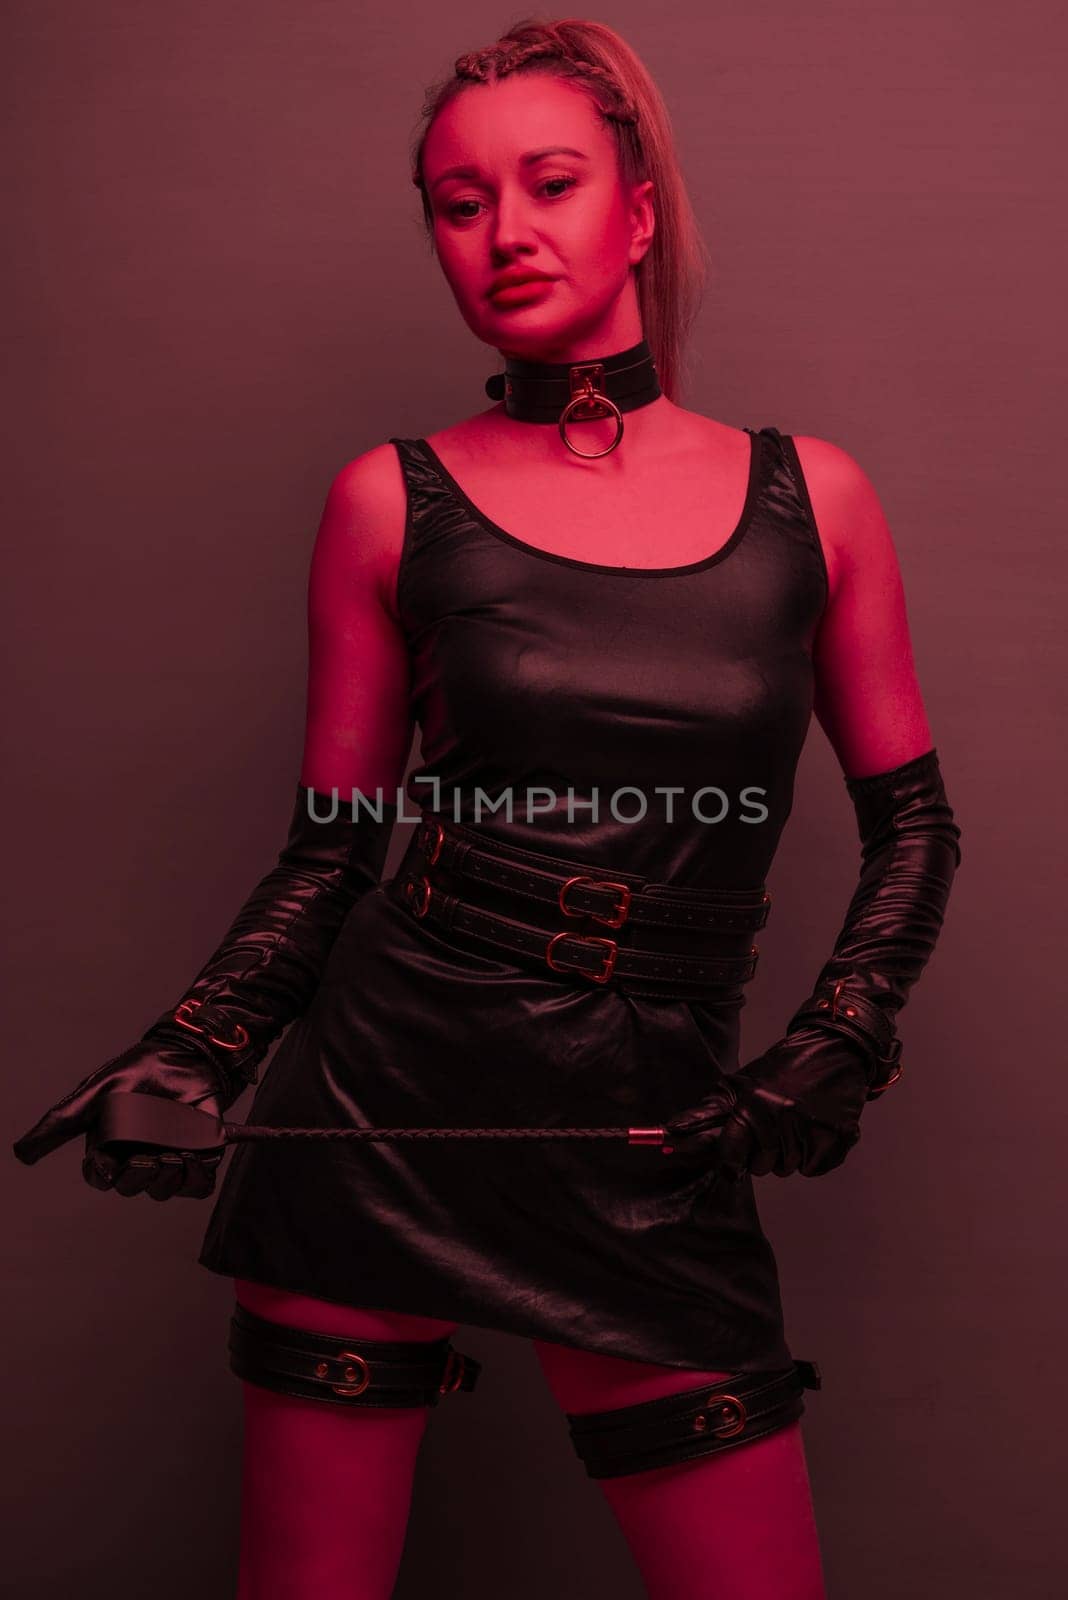 Beautiful dominant brunette mistress woman in latex dress and gloves posing with riding crop on red light backgound